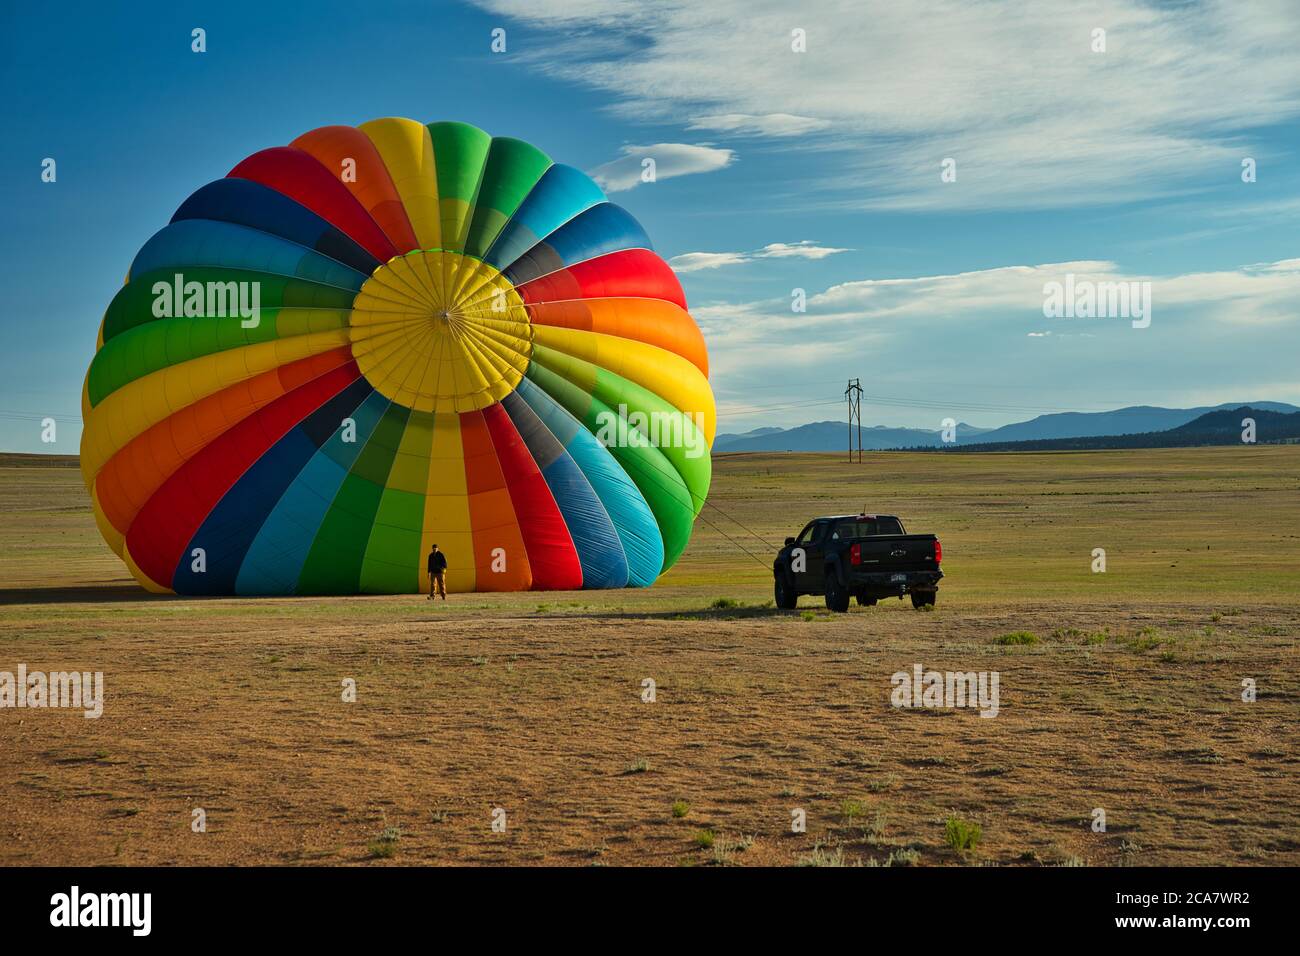 Hot air balloon beside man and truck shows the immense size of the large craft. Bright colors of the balloon contrast against the blue sky. Massive fl Stock Photo